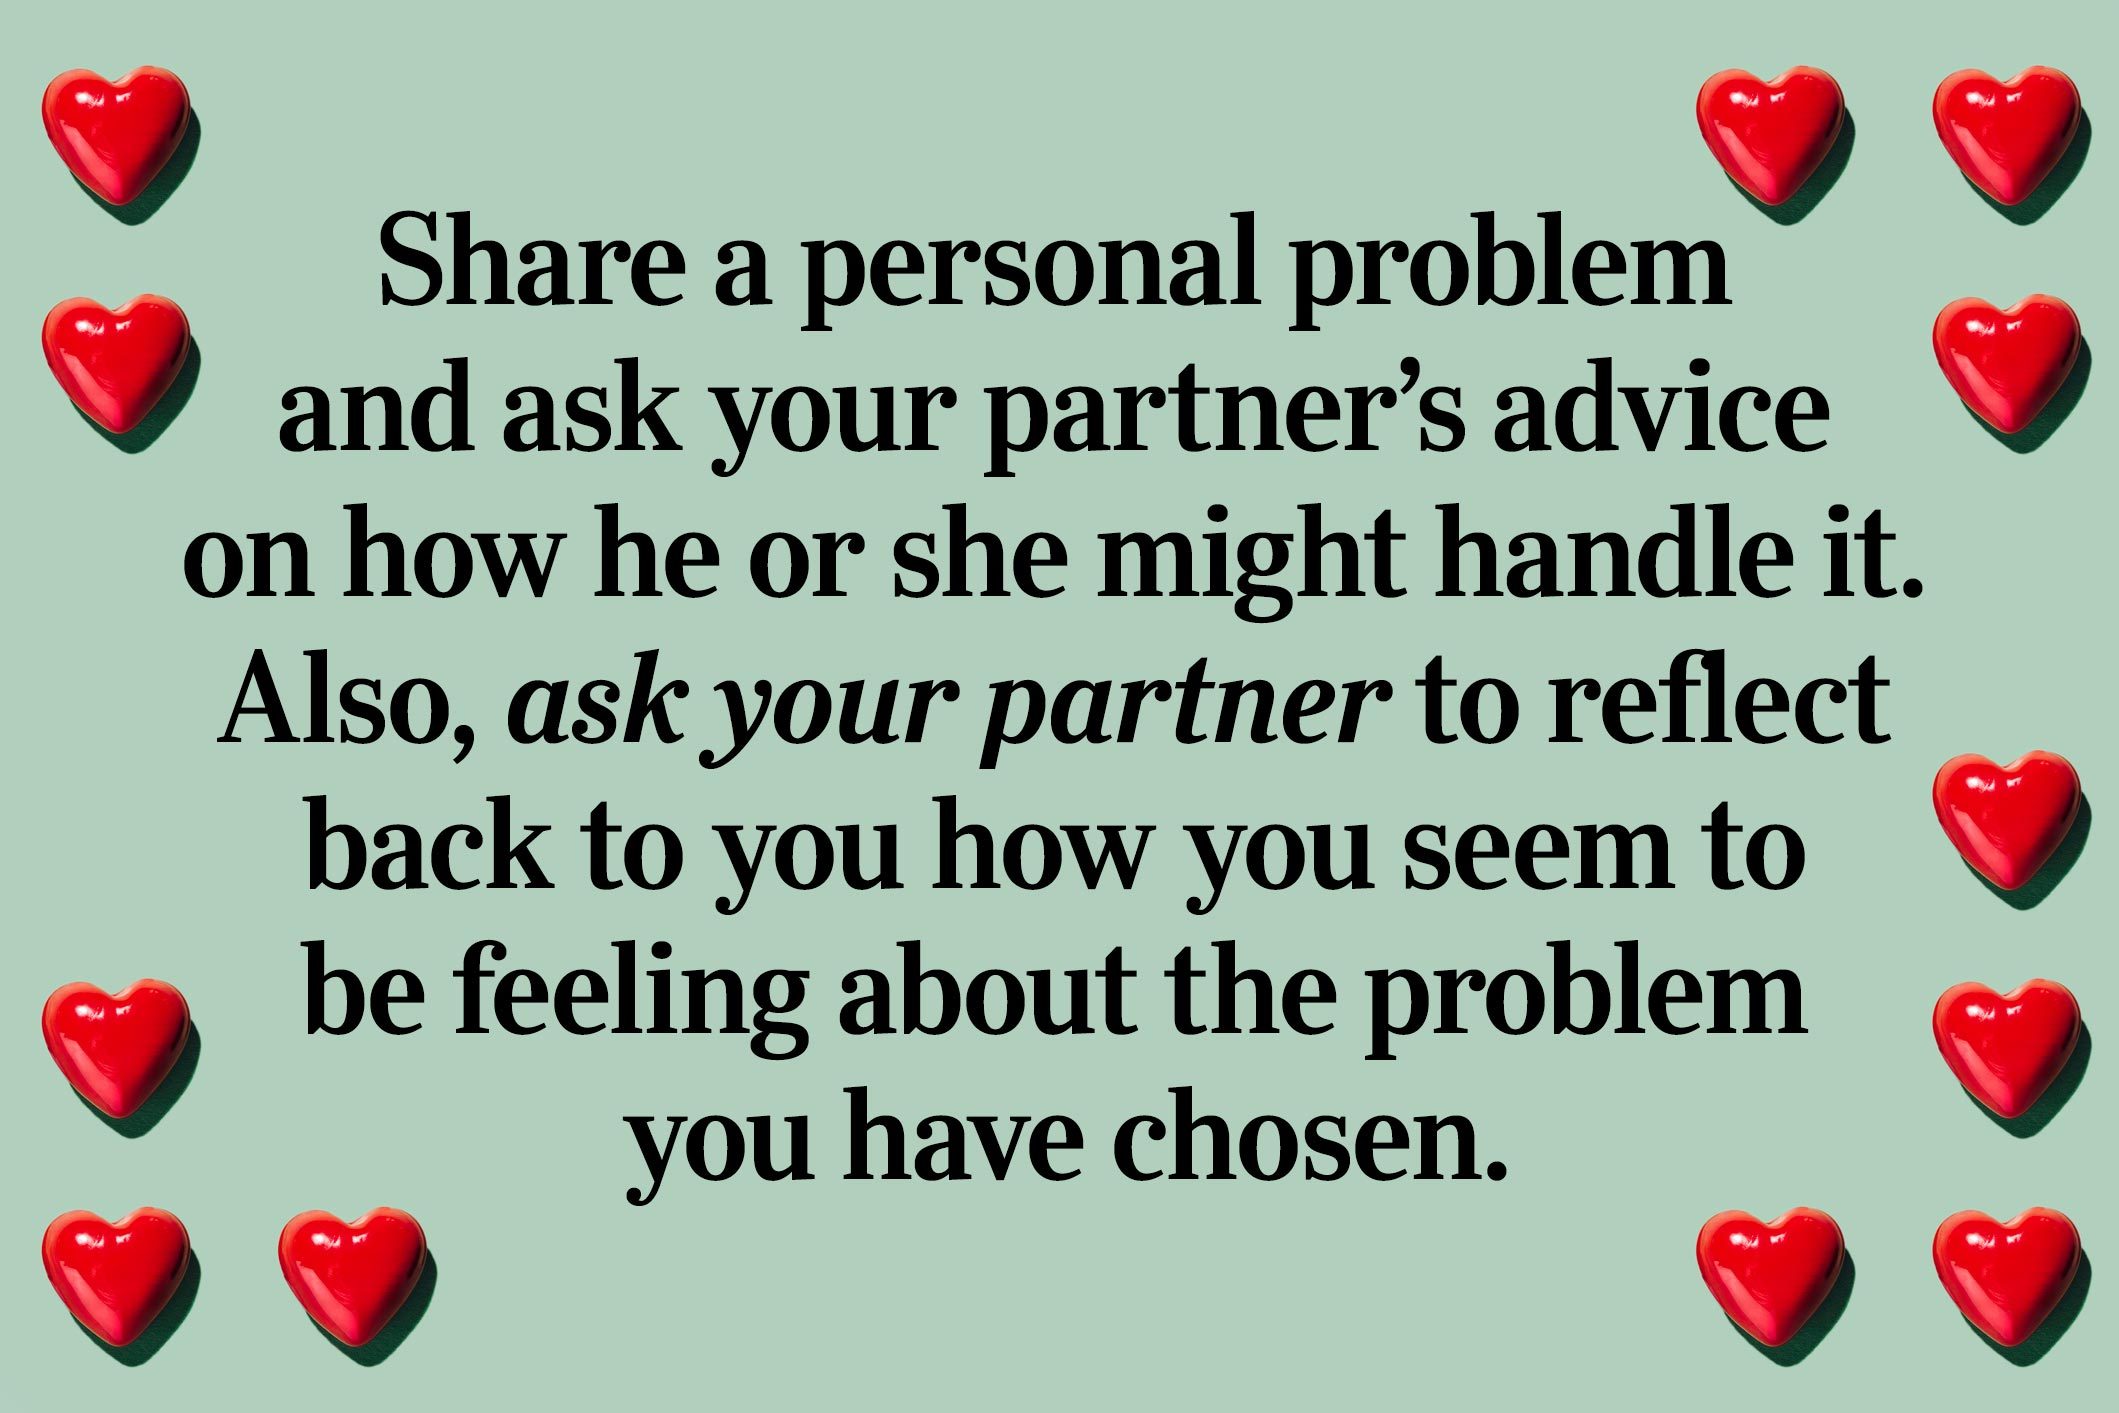 <p>Last one: Share a personal problem and ask your partner’s advice on how he or she might handle it. Also, ask your partner to reflect back to you how you seem to be feeling about the problem you have chosen.</p> <p>And, with that, you've completed the 36 questions that can lead to love!</p> <p><strong>Source:</strong></p> <ul> <li><a href="http://news.berkeley.edu/2015/02/12/love-in-the-lab/" rel="noopener">Berkeley News</a>: "Creating love in the lab: The 36 questions that spark intimacy"</li> </ul>